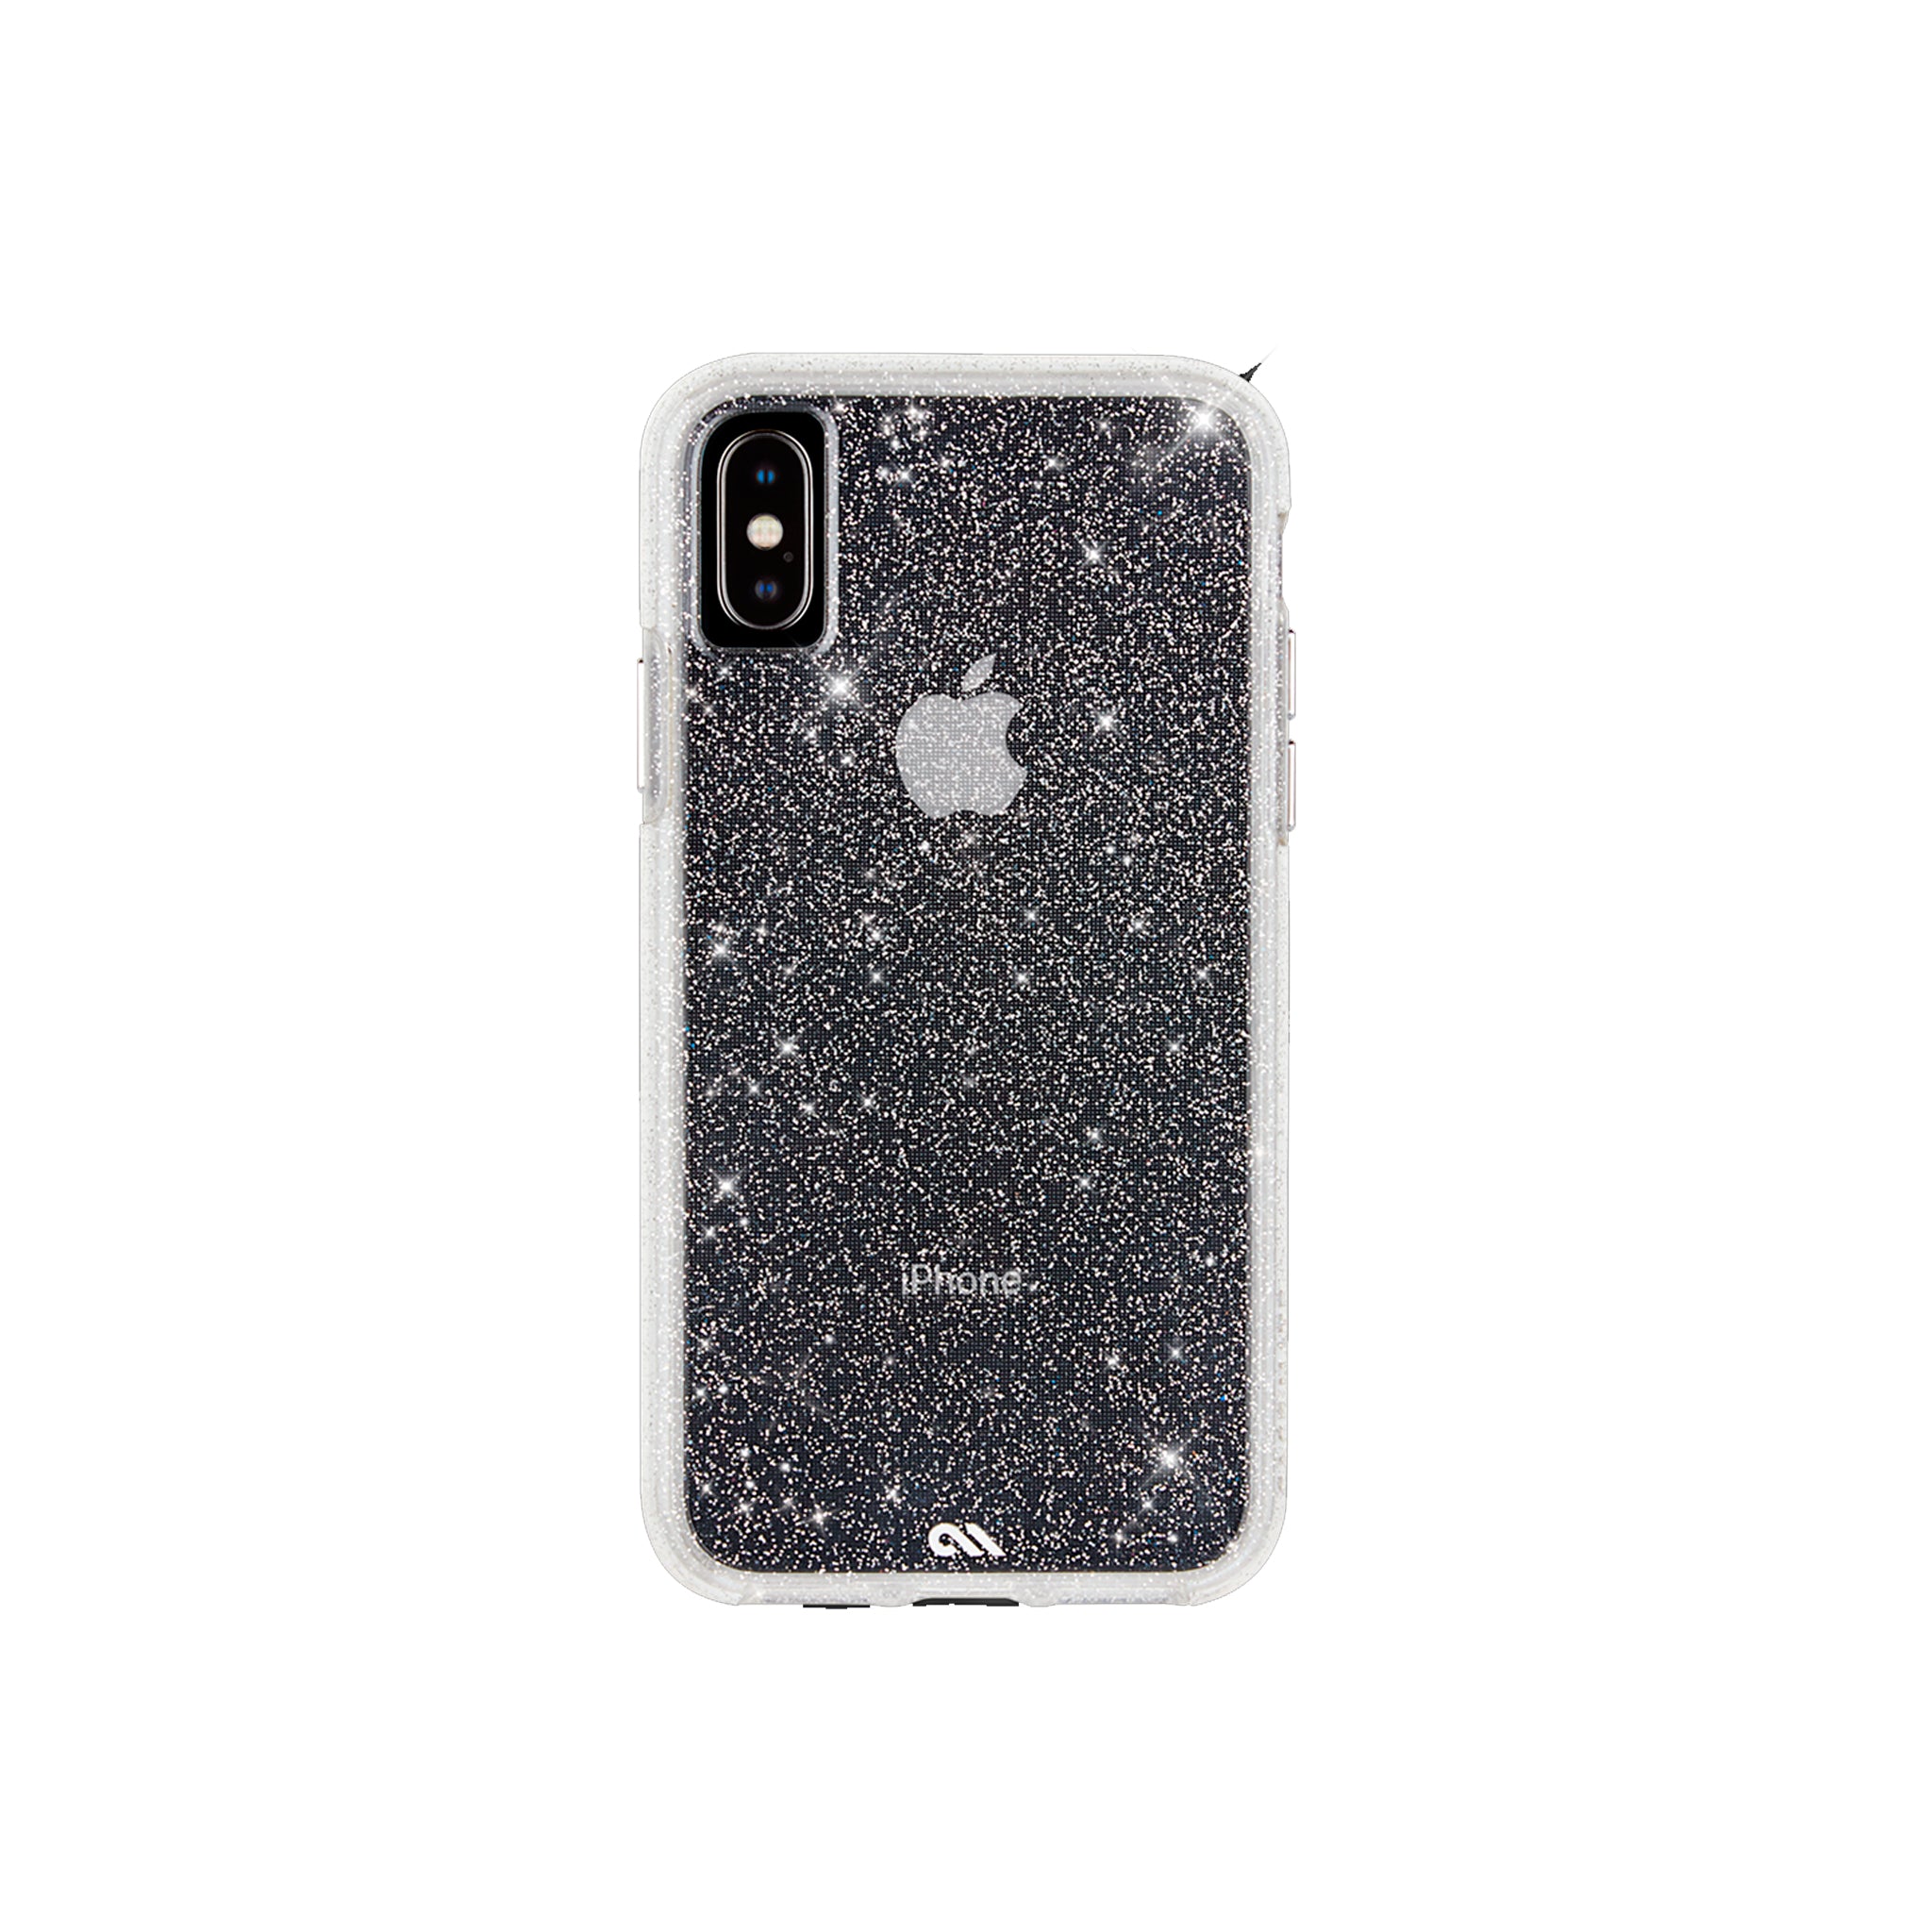 Case-mate - Sheer Crystal Case For Apple iPhone Xs / X - Clear